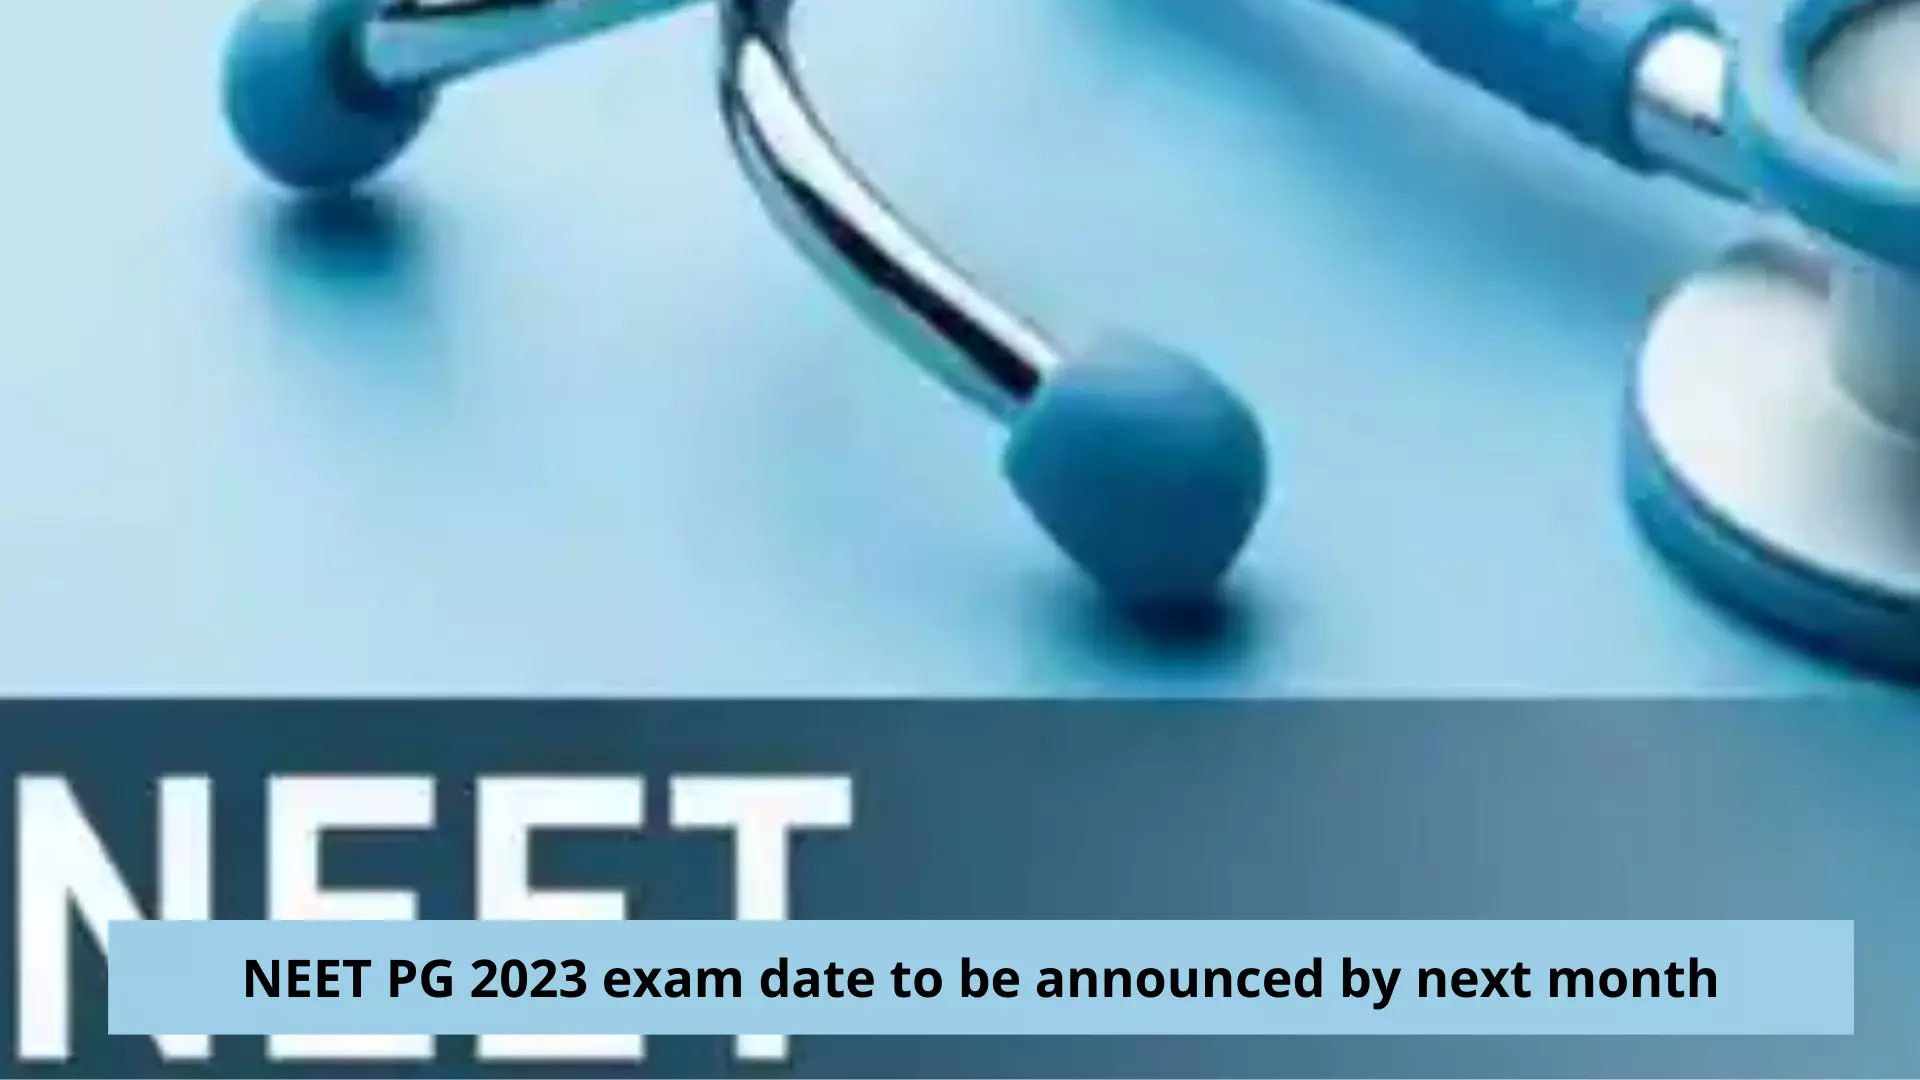 NEET PG 2023 exam date to be announced by next month